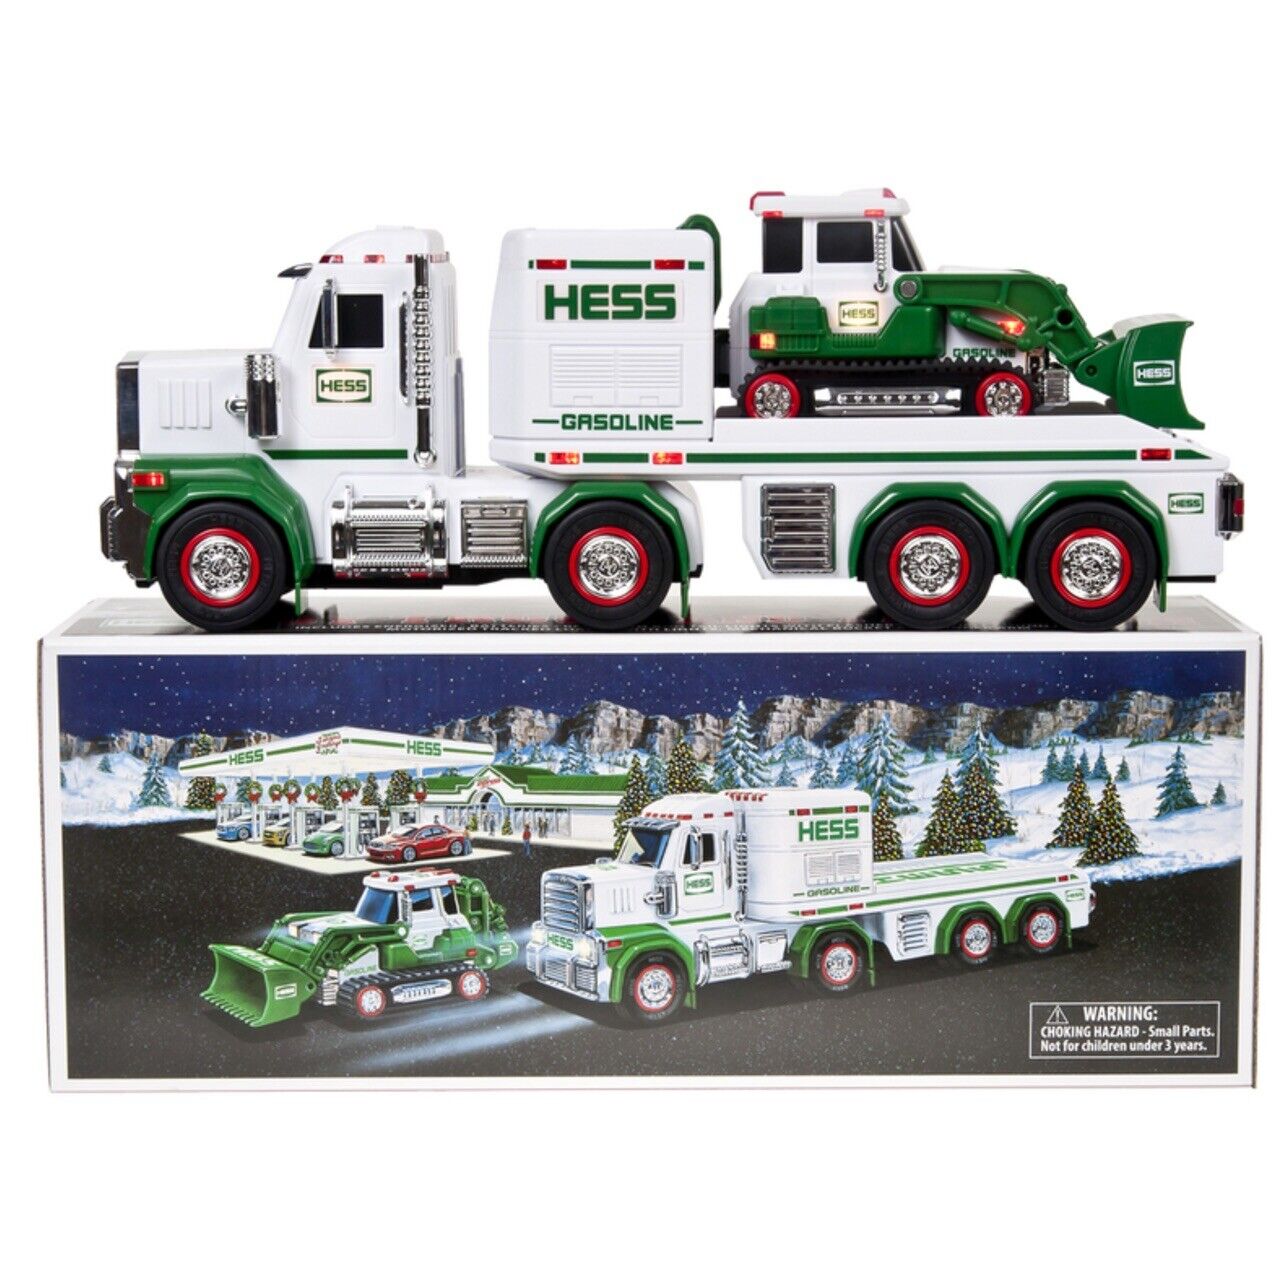 Mint Condition 2013 Hess Toy Truck And Tractor New In Box